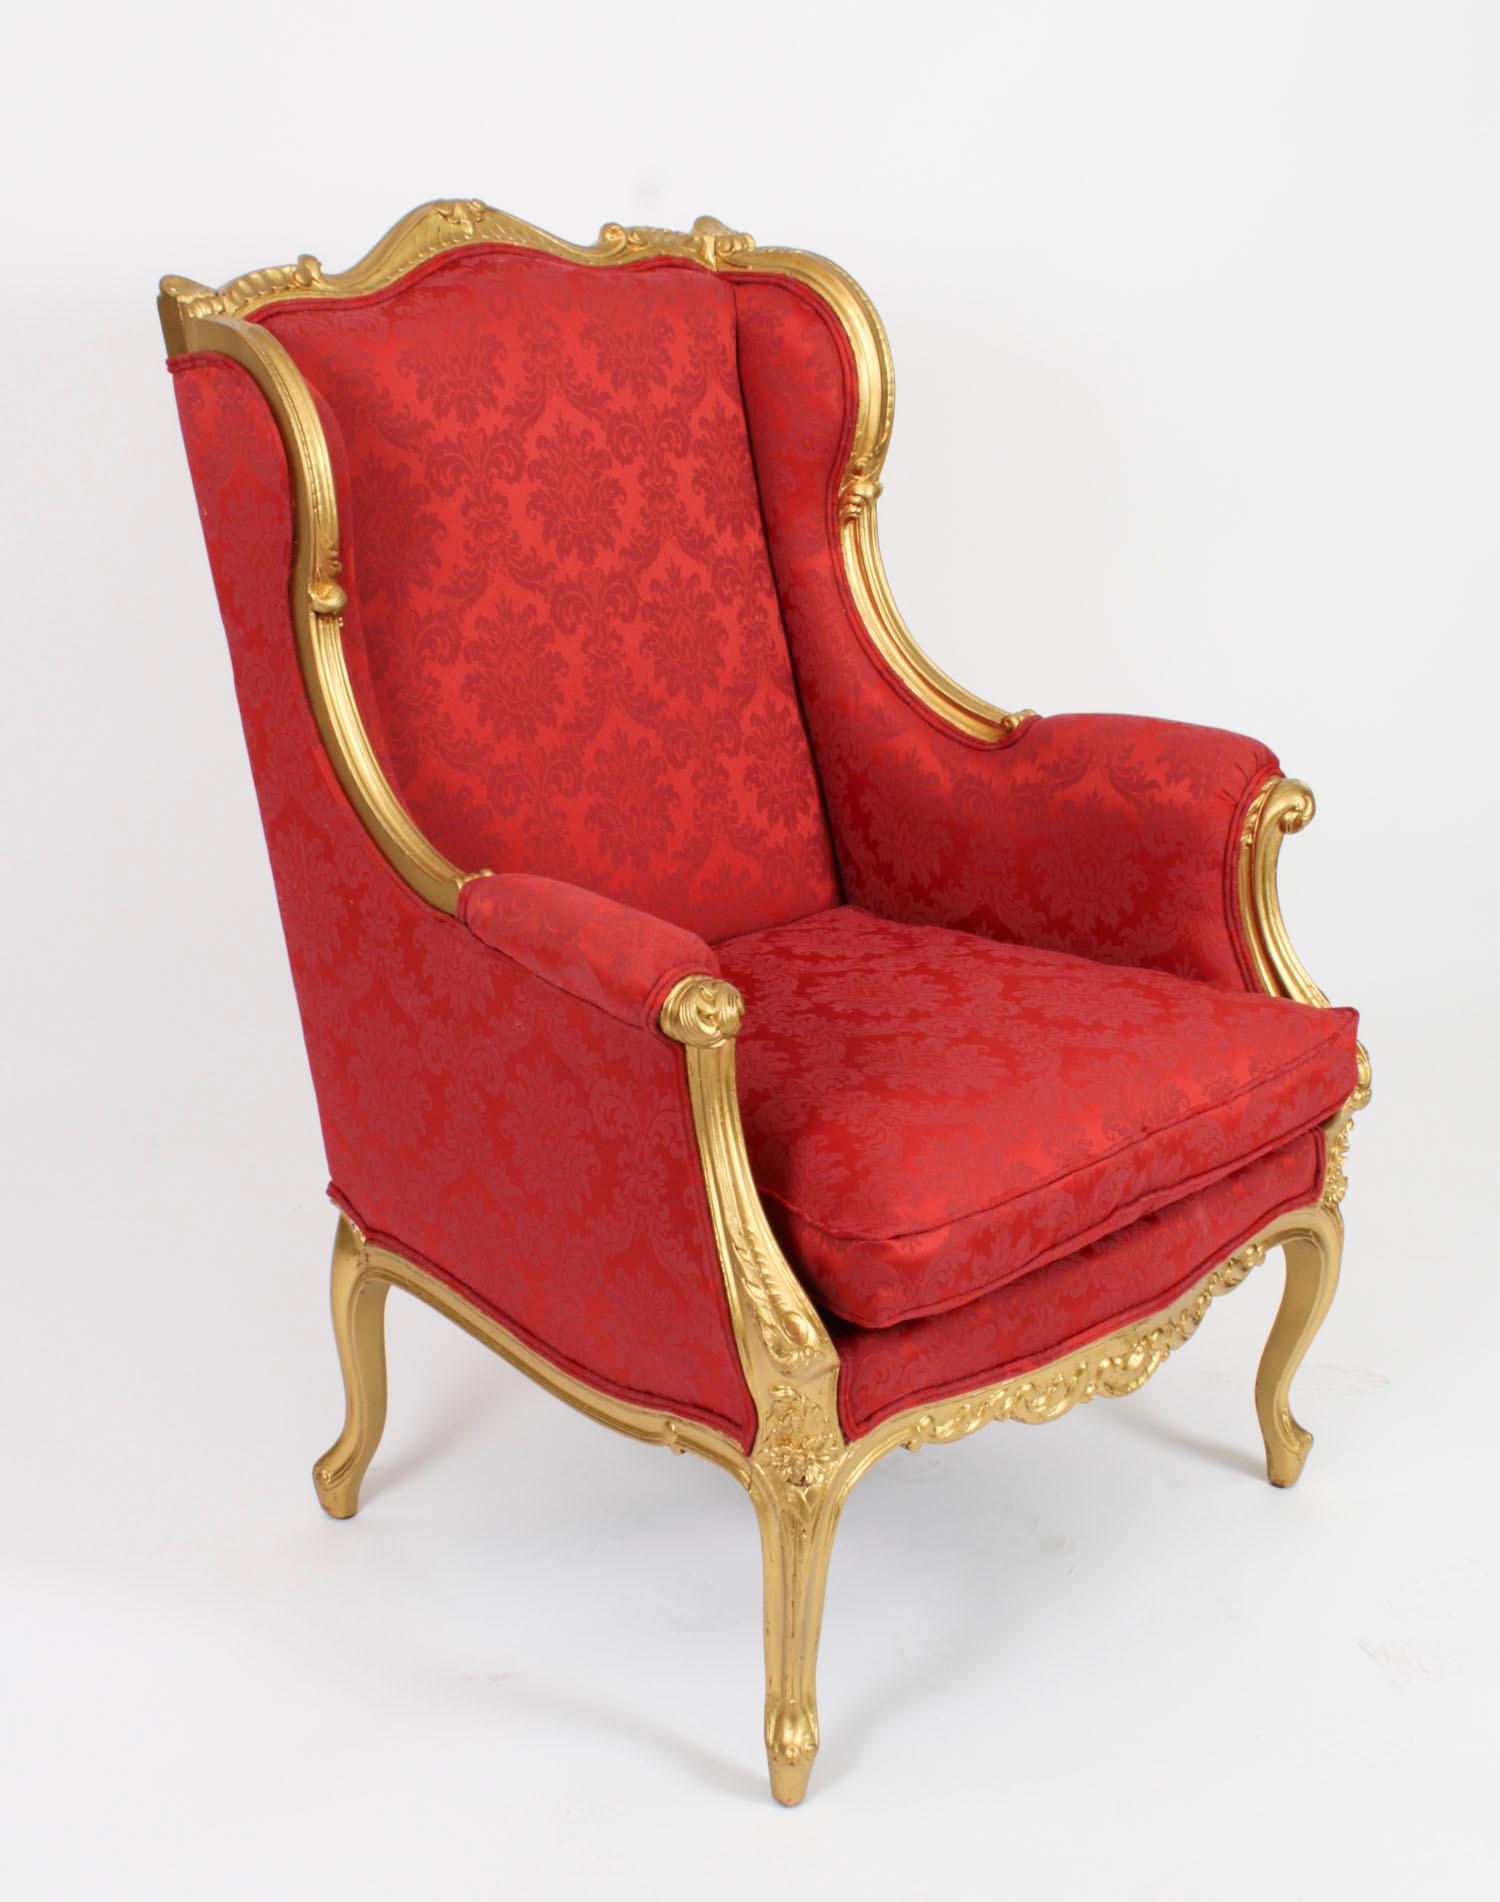 Antique Louis XV Revival Giltwood Shaped Bergere Armchair, 19th Century For Sale 7